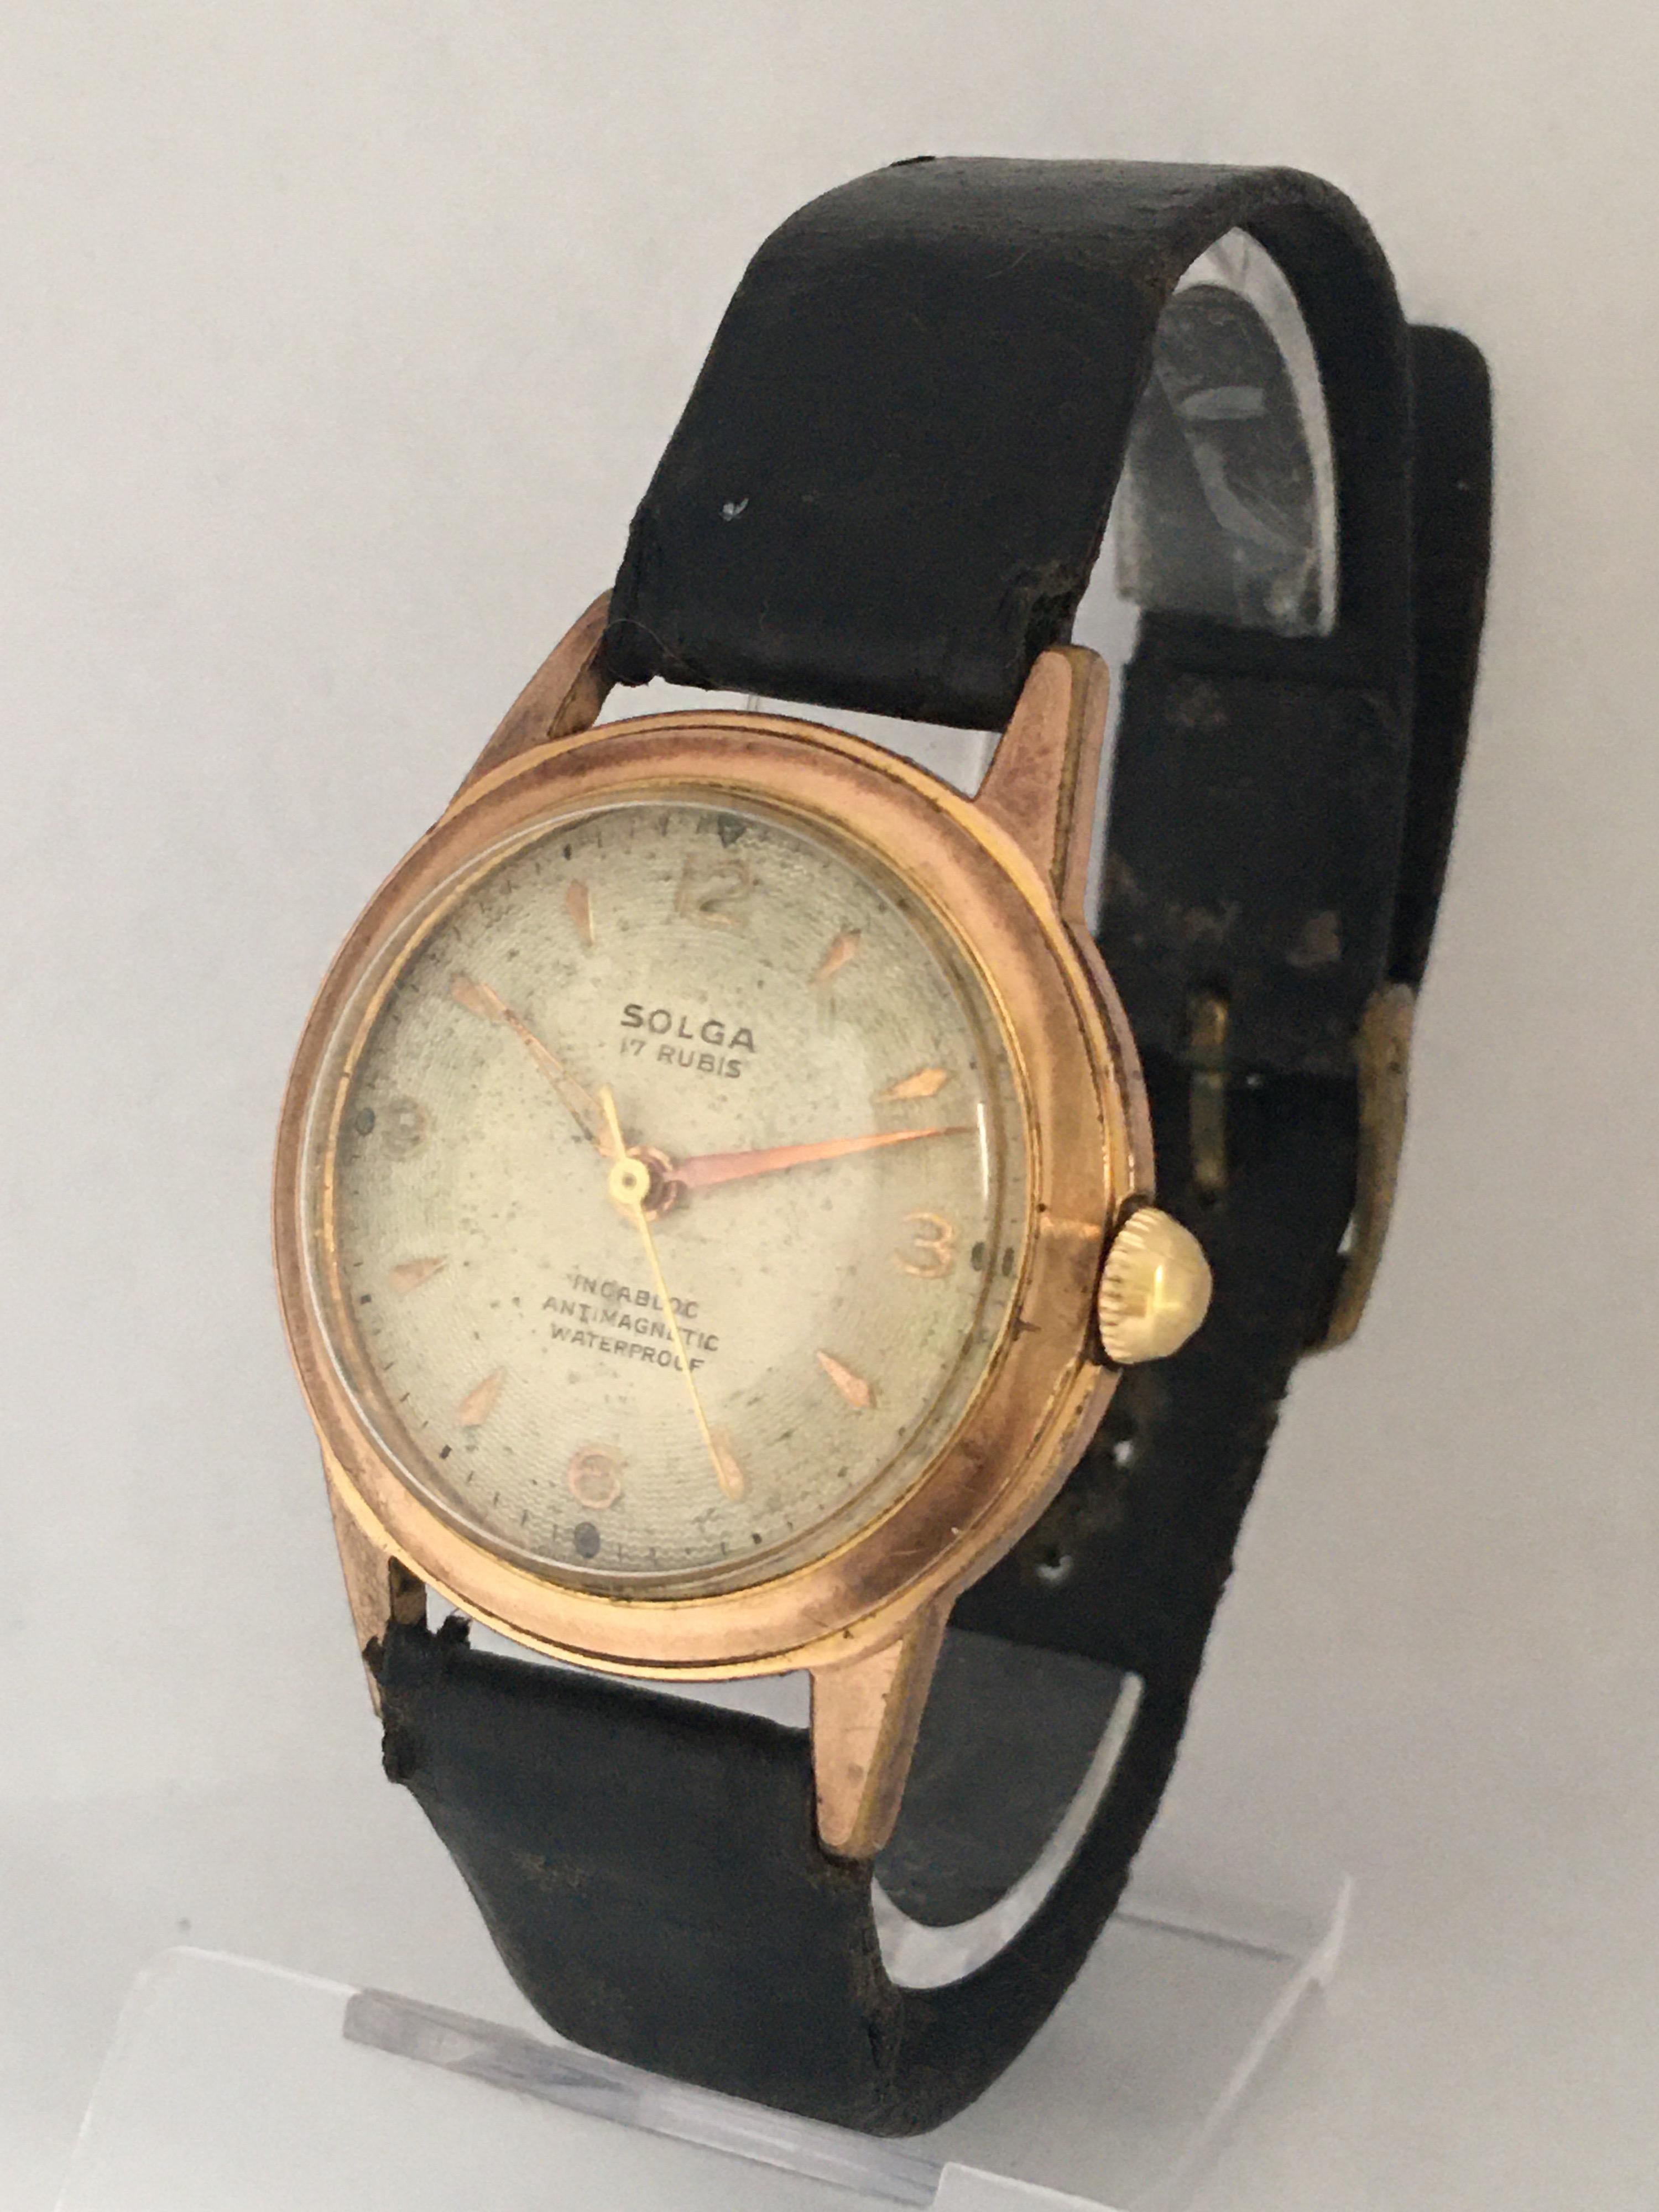 This beautiful pre-owed vintage hand winding watch is in good working condition. It is recently been serviced and it runs well. Visible signs of ageing and wear with light scratches on the back case. The watch dial is a bit worn as shown. The strap